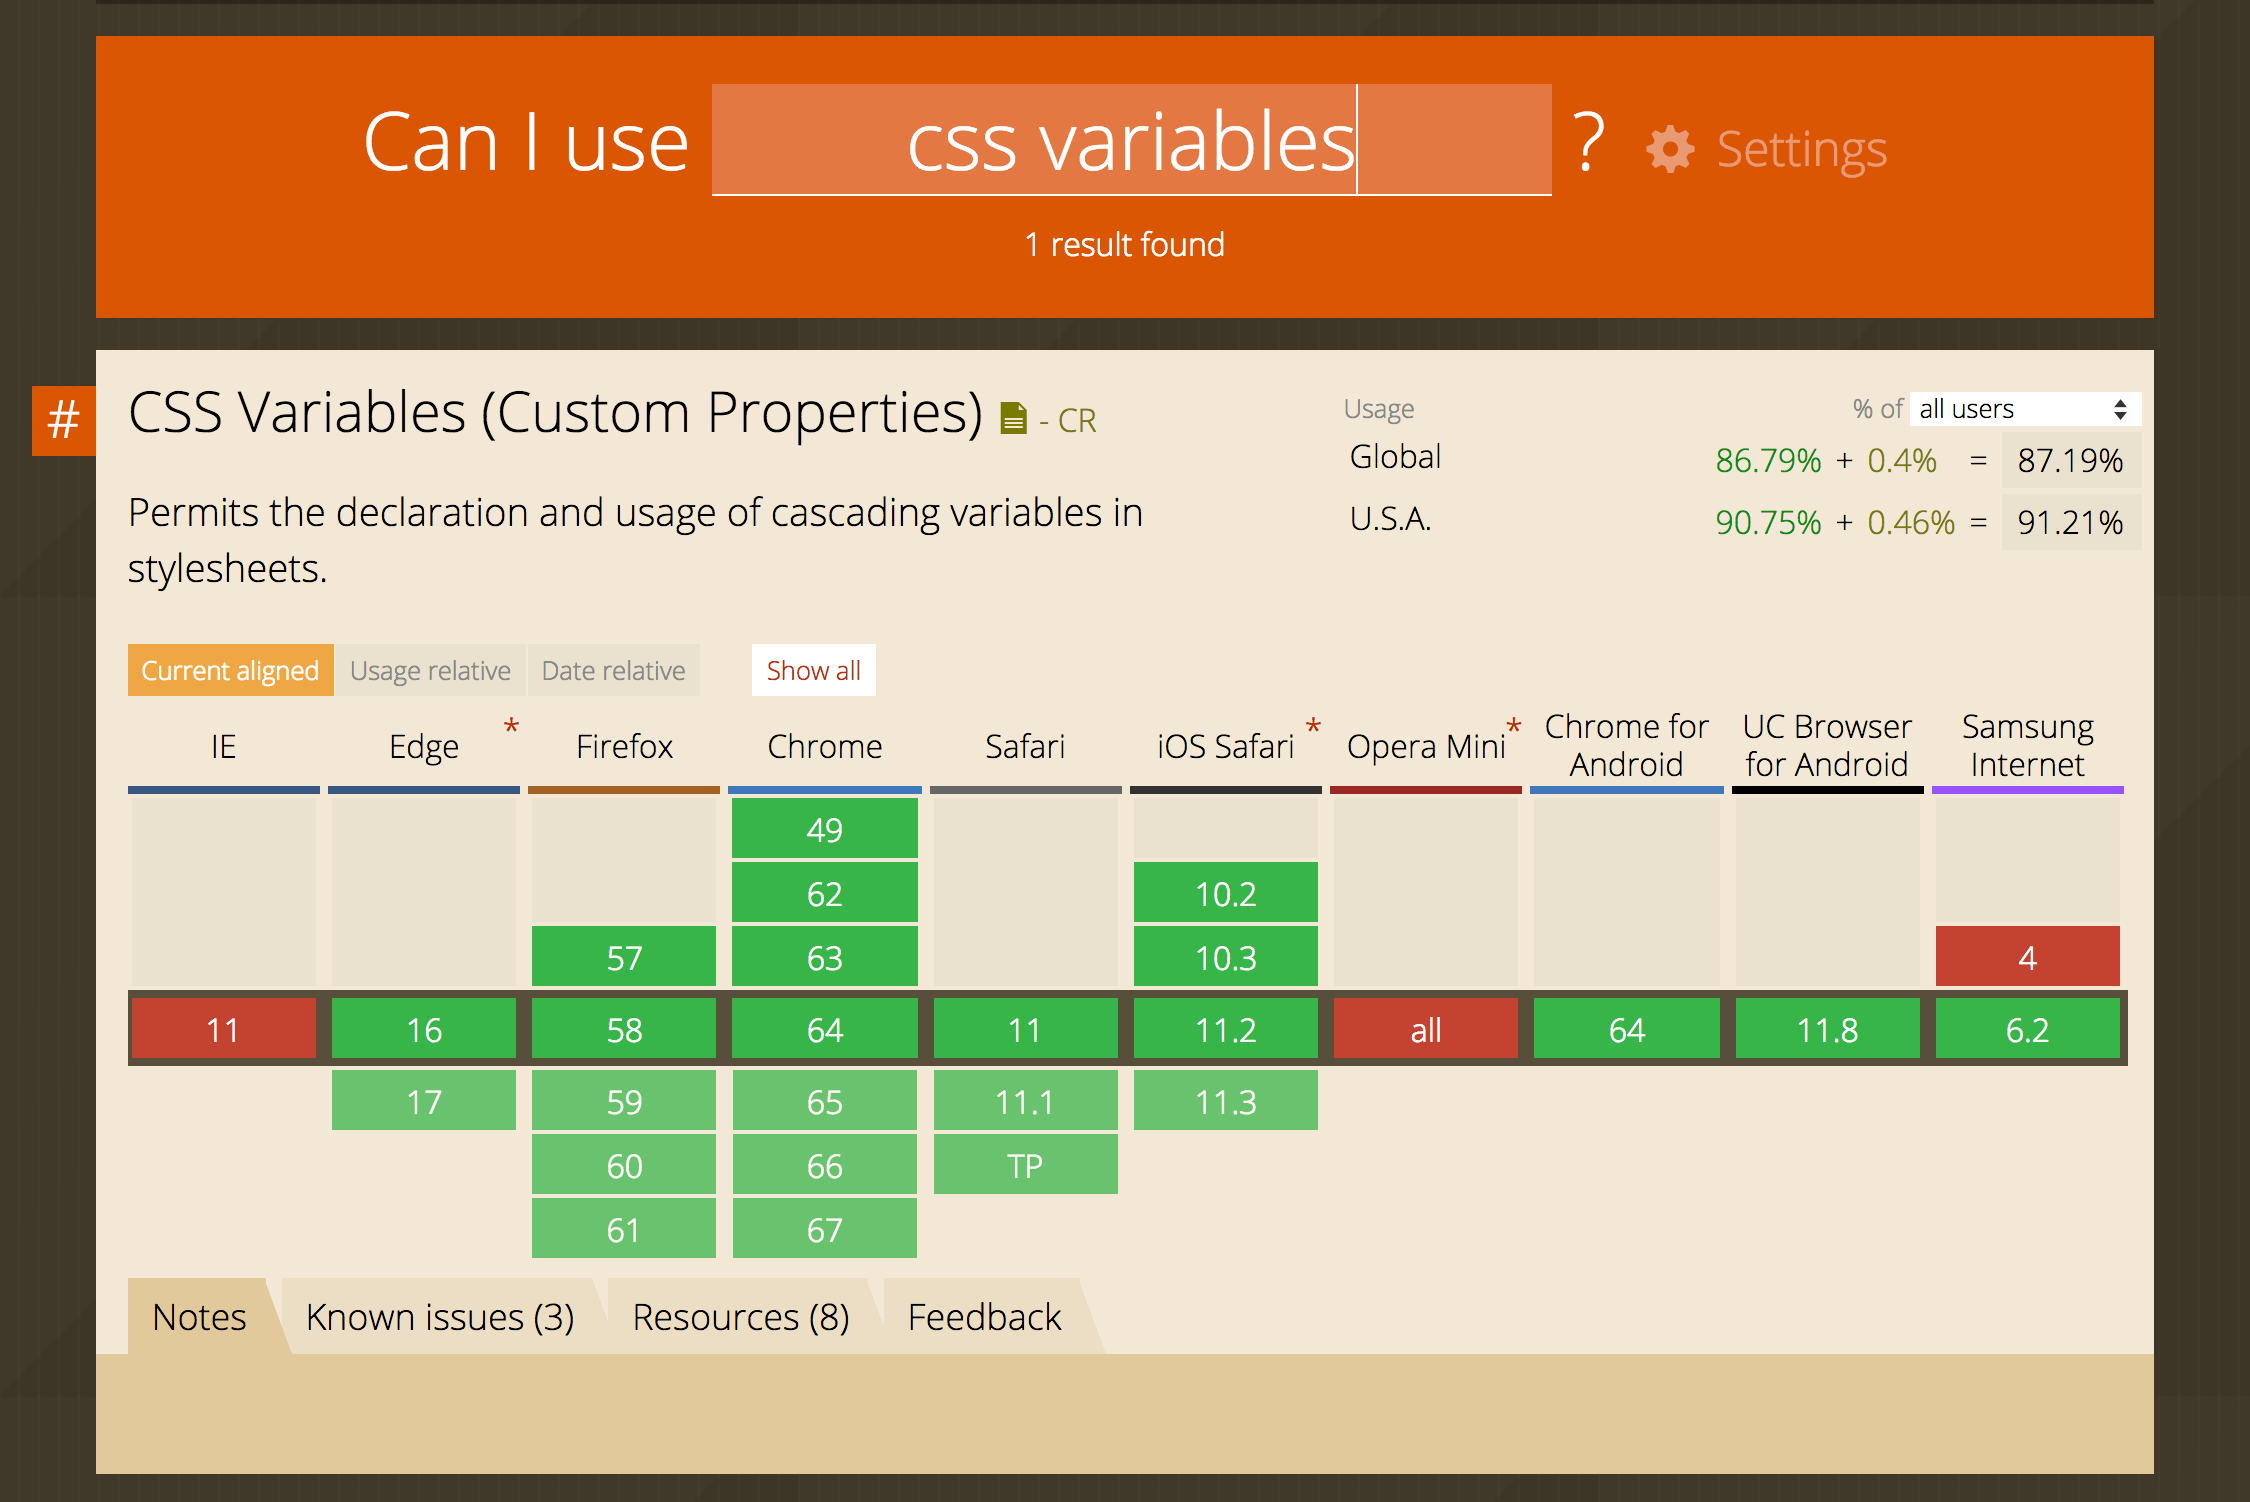 CanIUse.com screenshot showing global support for custom CSS properties (CSS variables) at around 90%